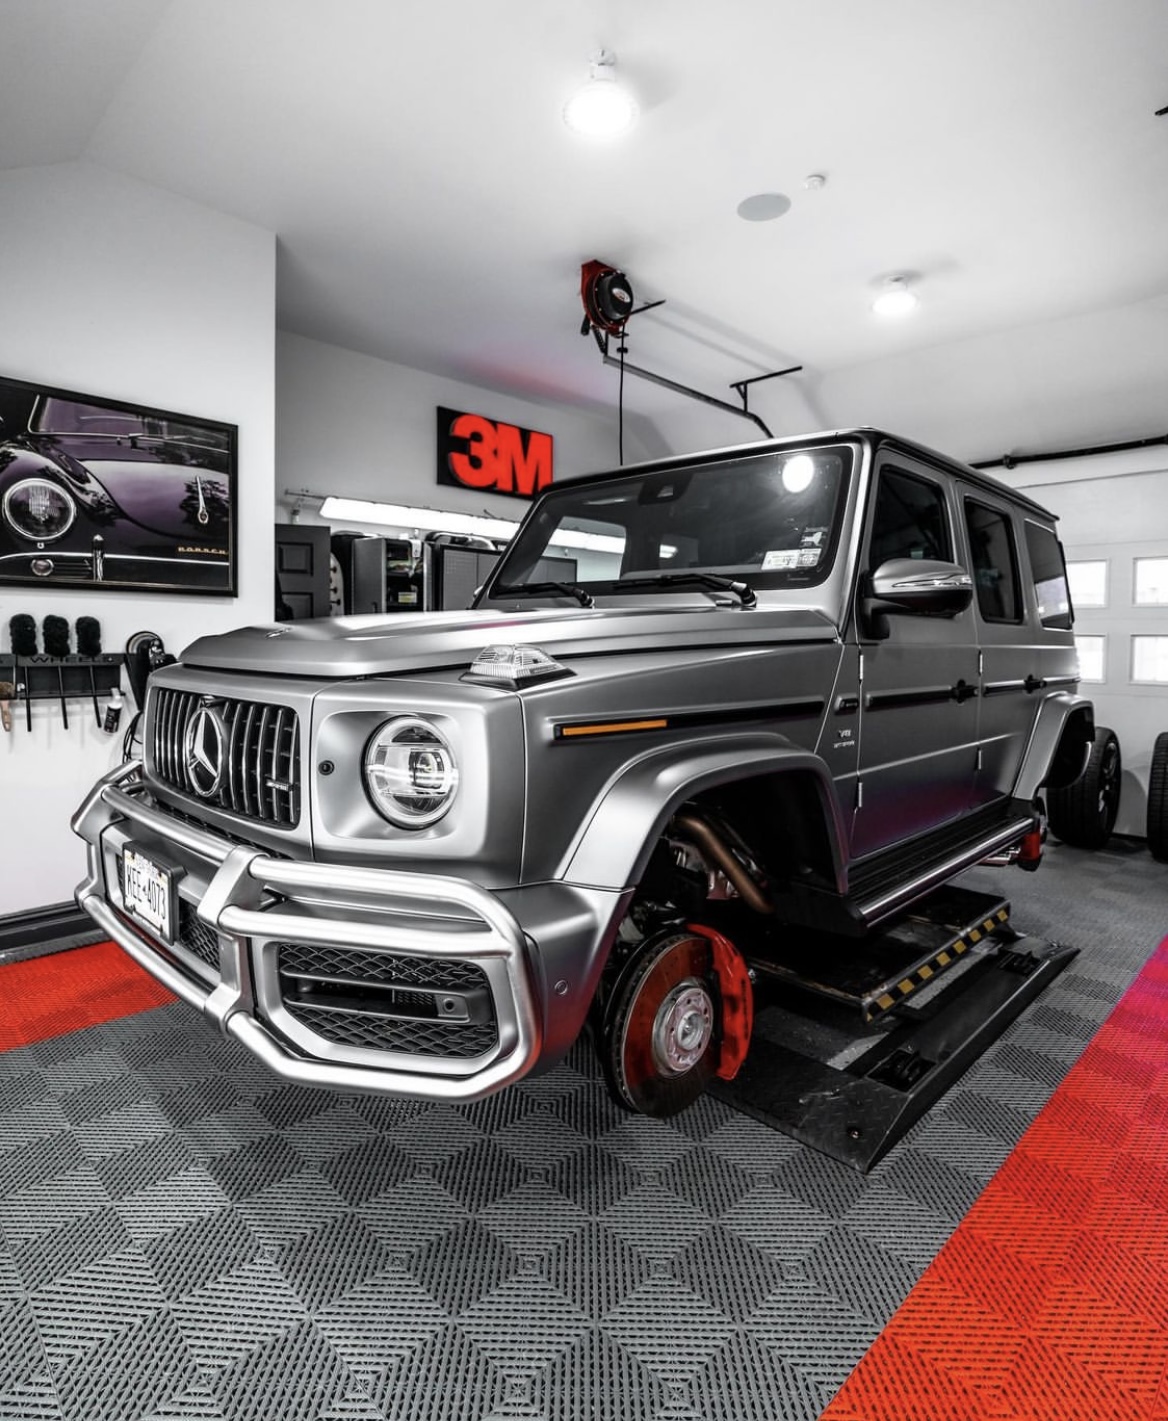 Mercedes G Wagon being detailed